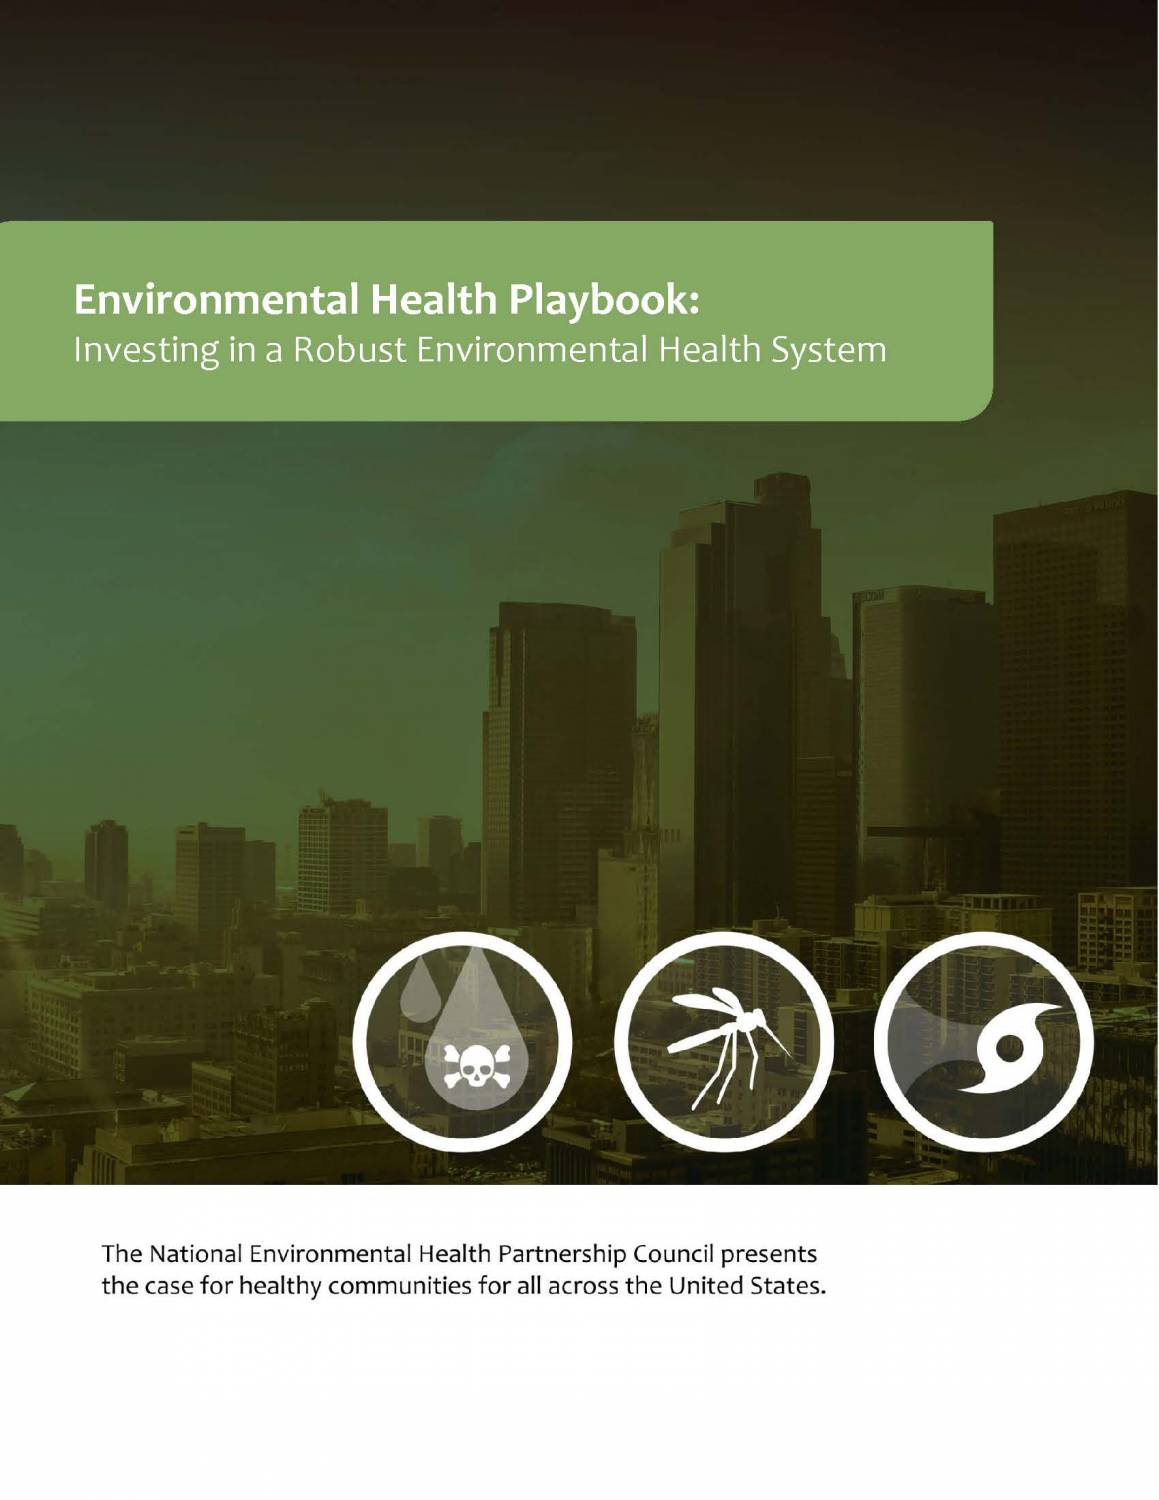 Environmental Health Playbook: Investing in a Robust Environmental Health System